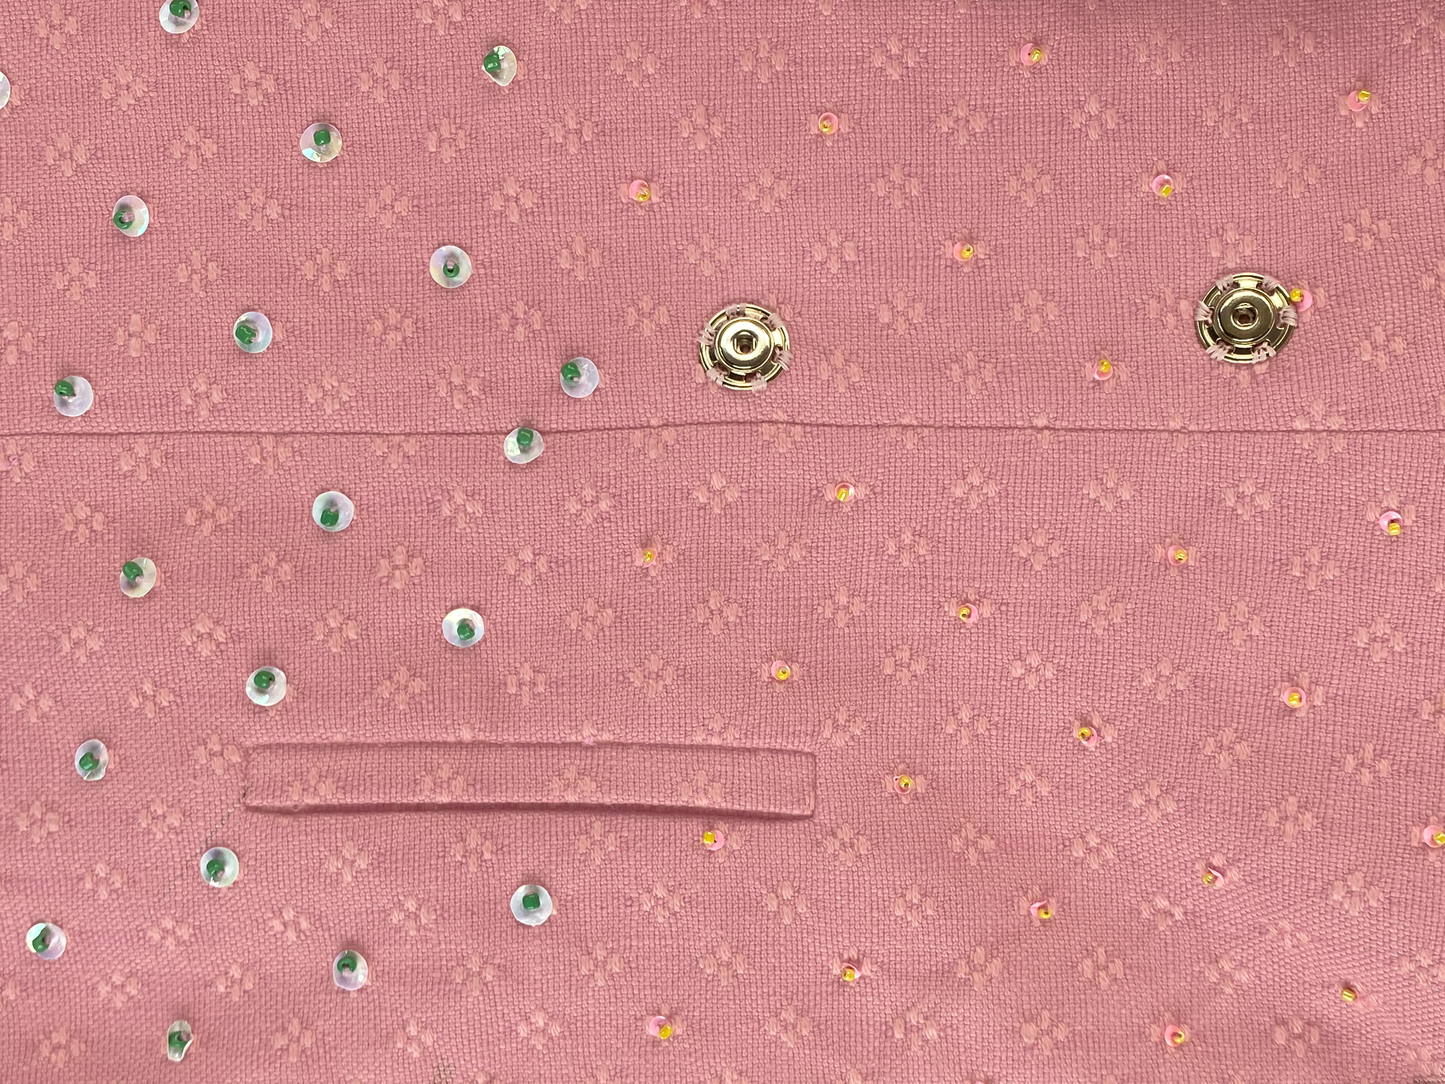 'Pink clay' Hand-beaded Artisanal Double-Breasted Tailored in Deadstock Cotton